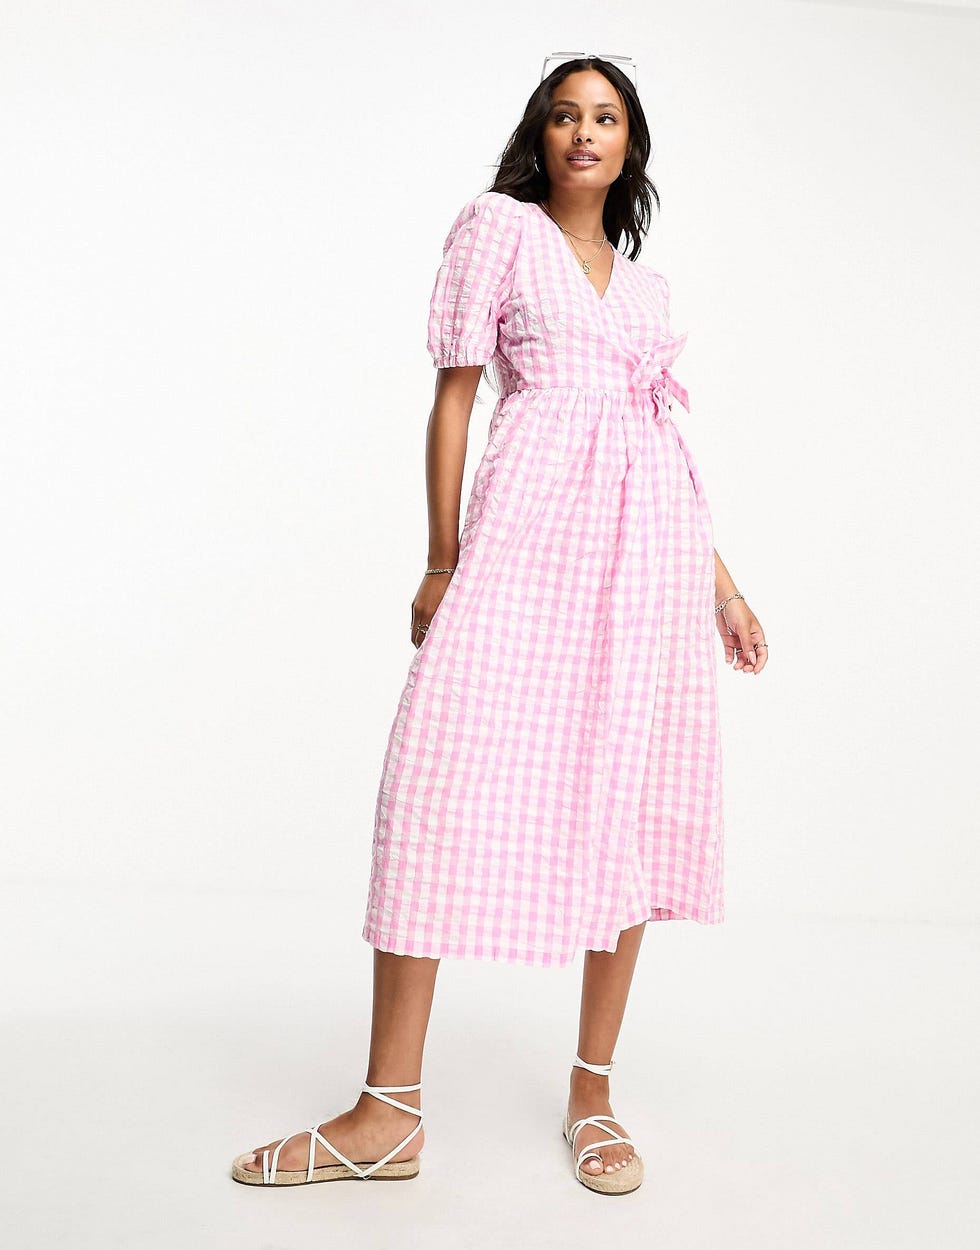 Seersucker Wrap Midi dress in Pink and White Gingham